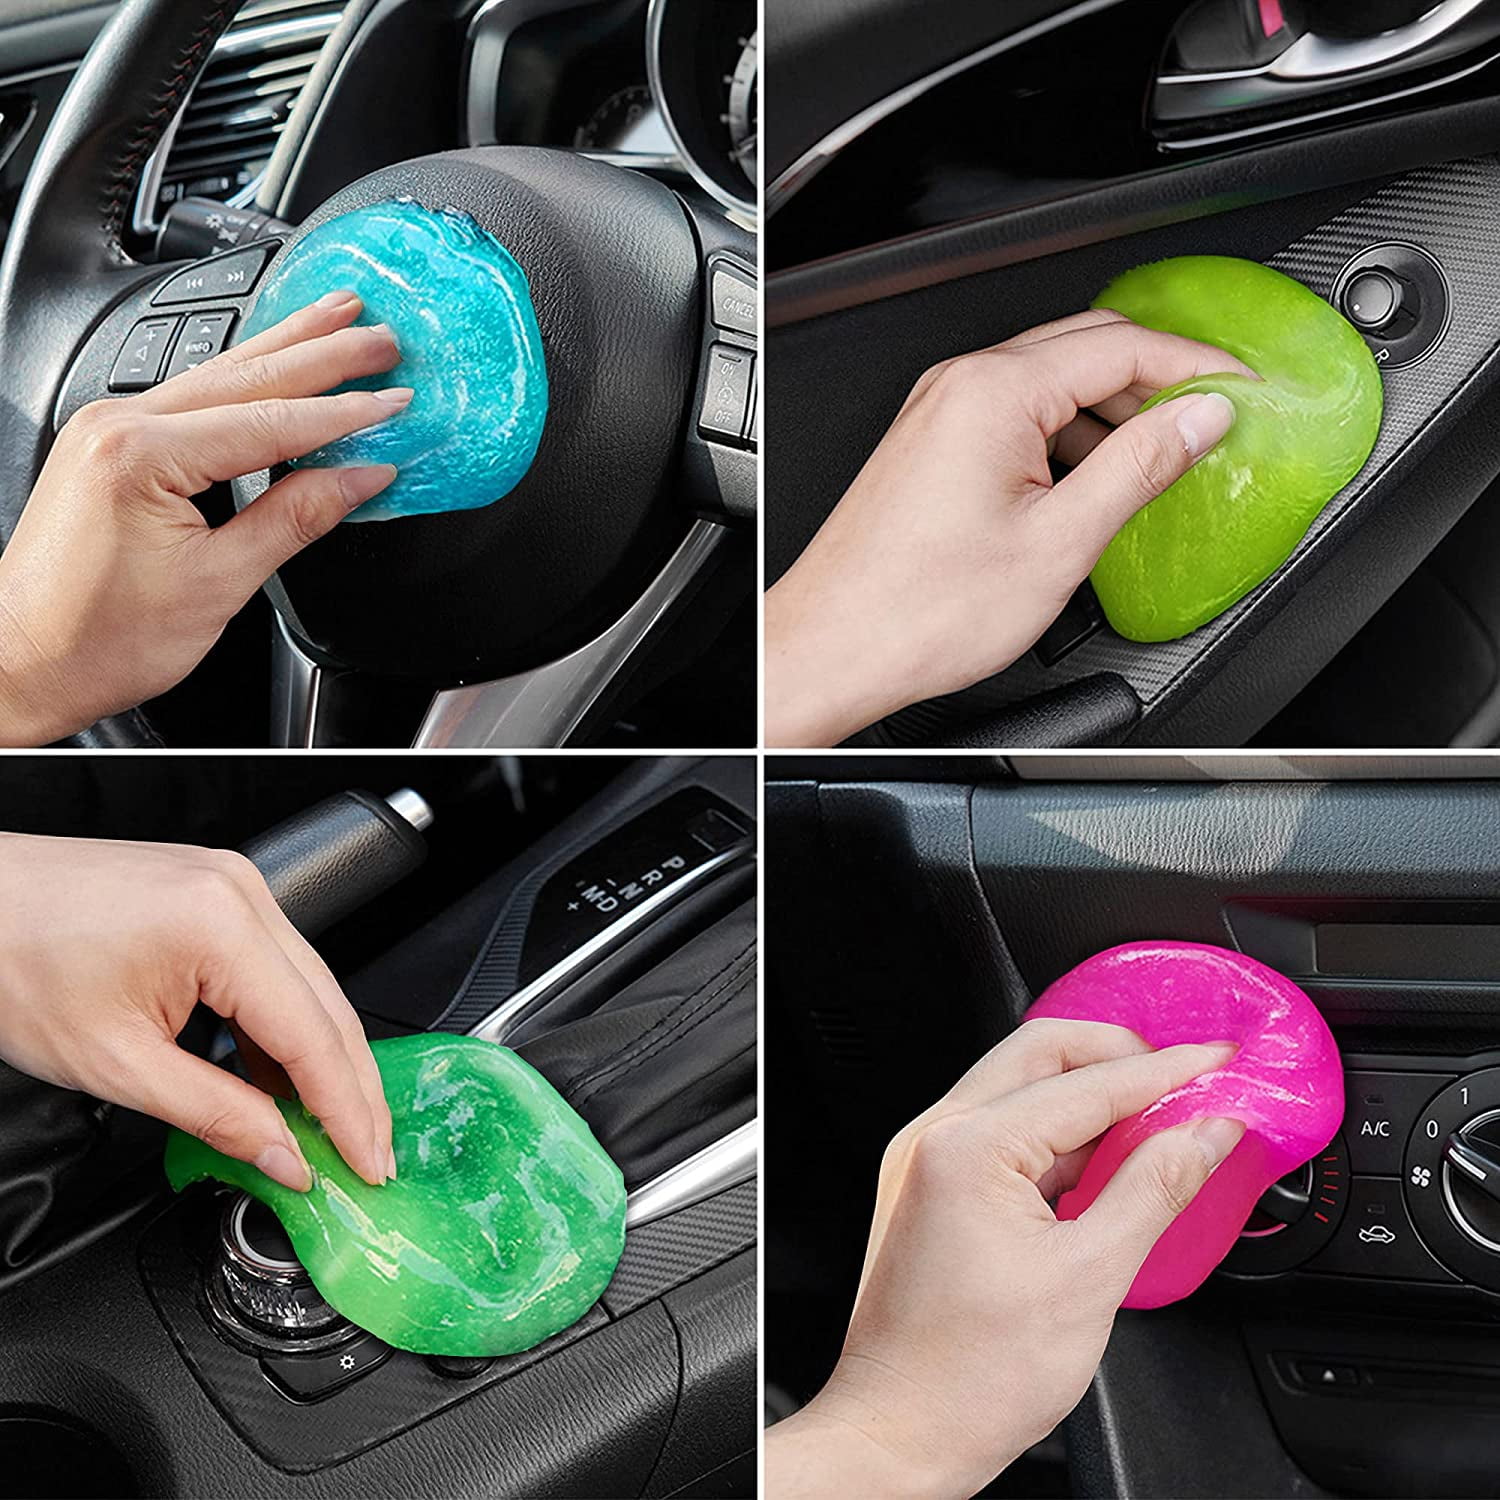 ASFSKY Car Cleaning Gel for Car Detailing Car Cleaning Gel Putty Reusable Keyboard Cleaner Gel Cleaning Gel Slime for Car Keyboard Cleaning Dust